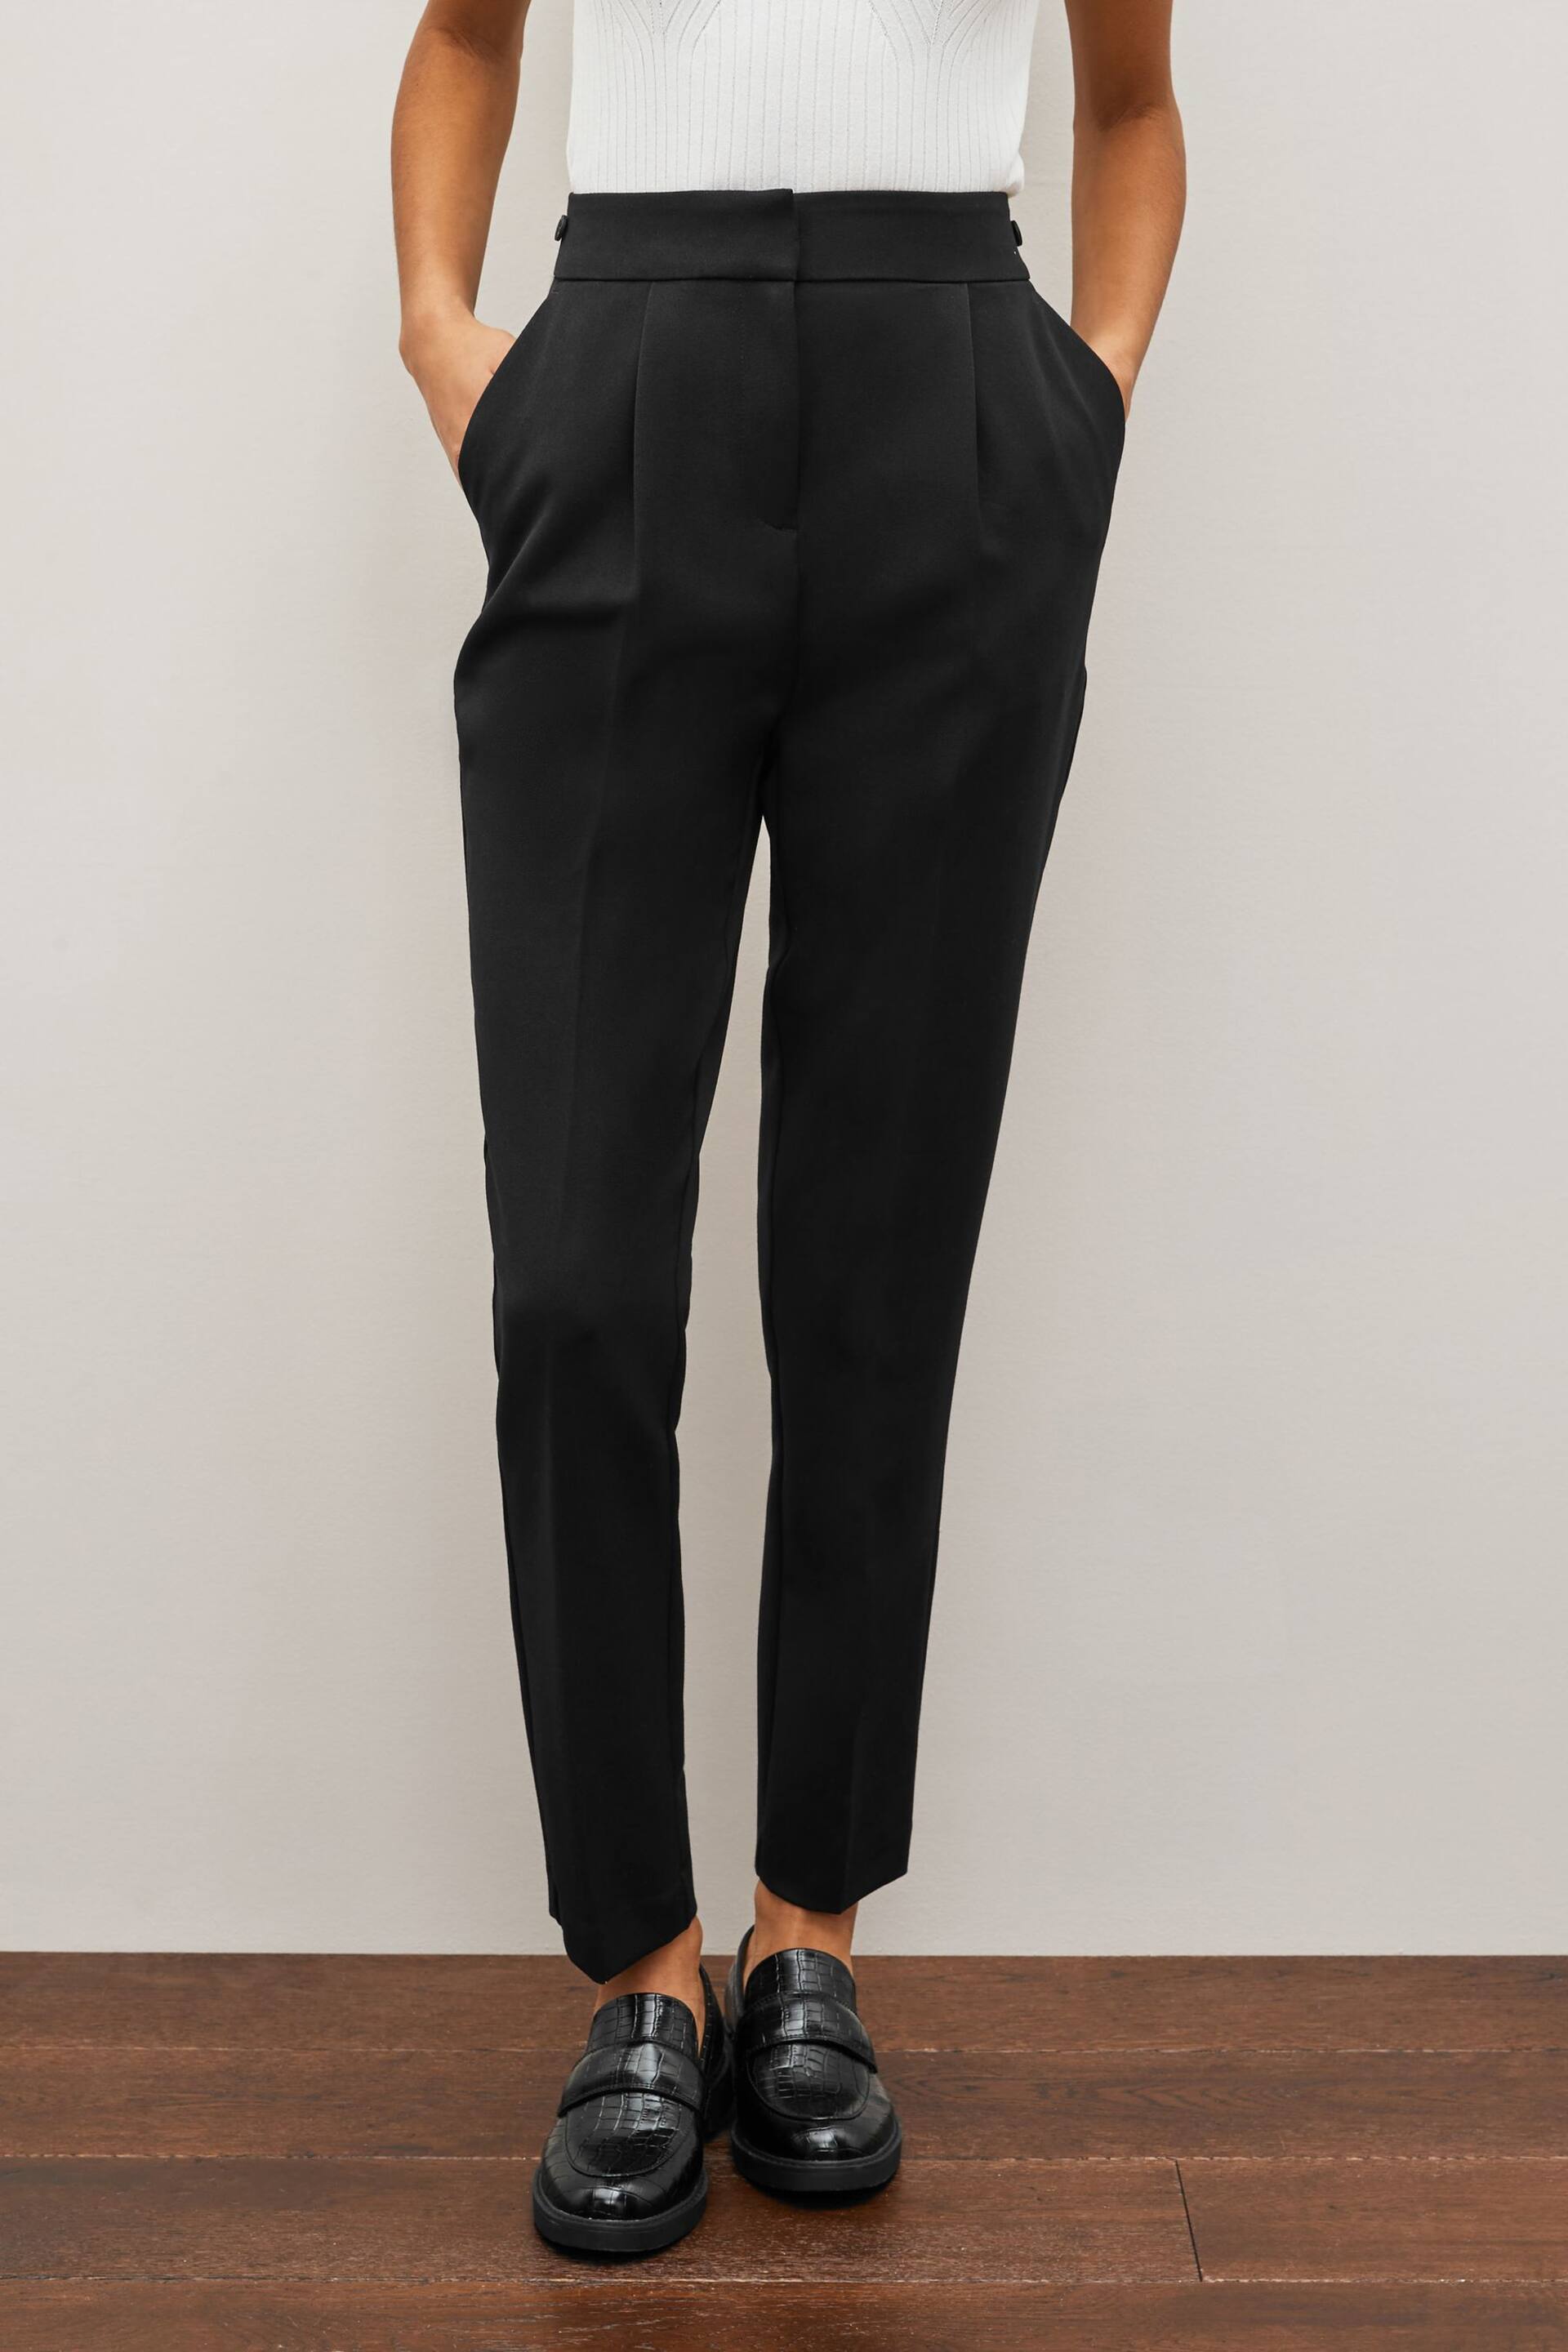 Black Tailored Hourglass Slim Trousers - Image 1 of 5